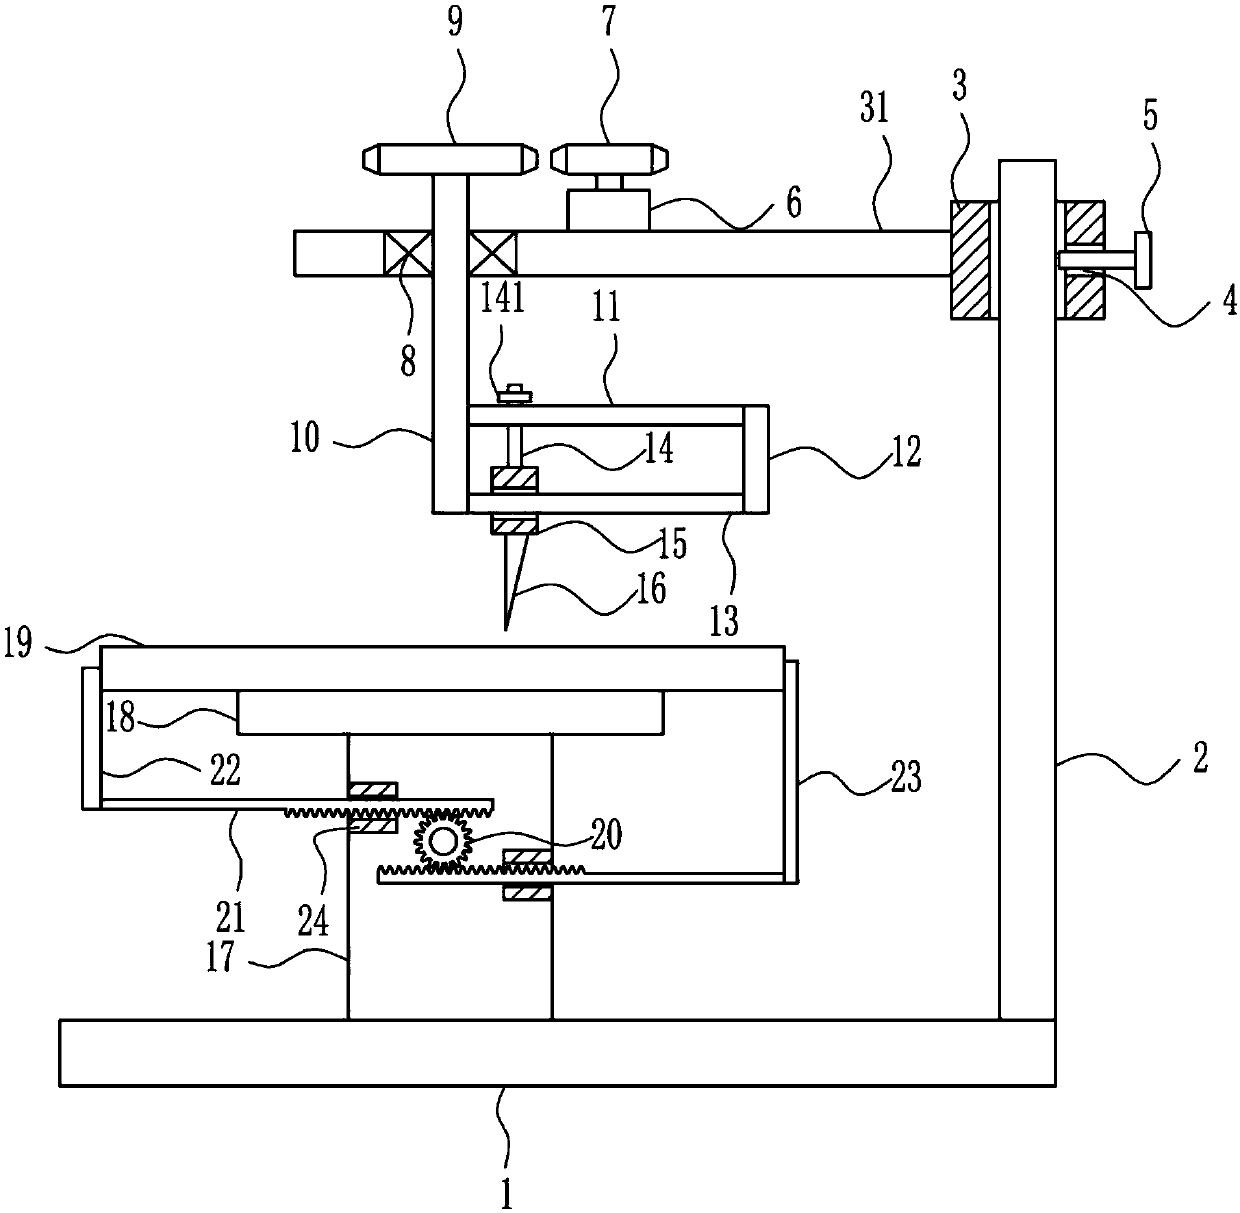 Apparatus for circle cutting of glass curtain wall